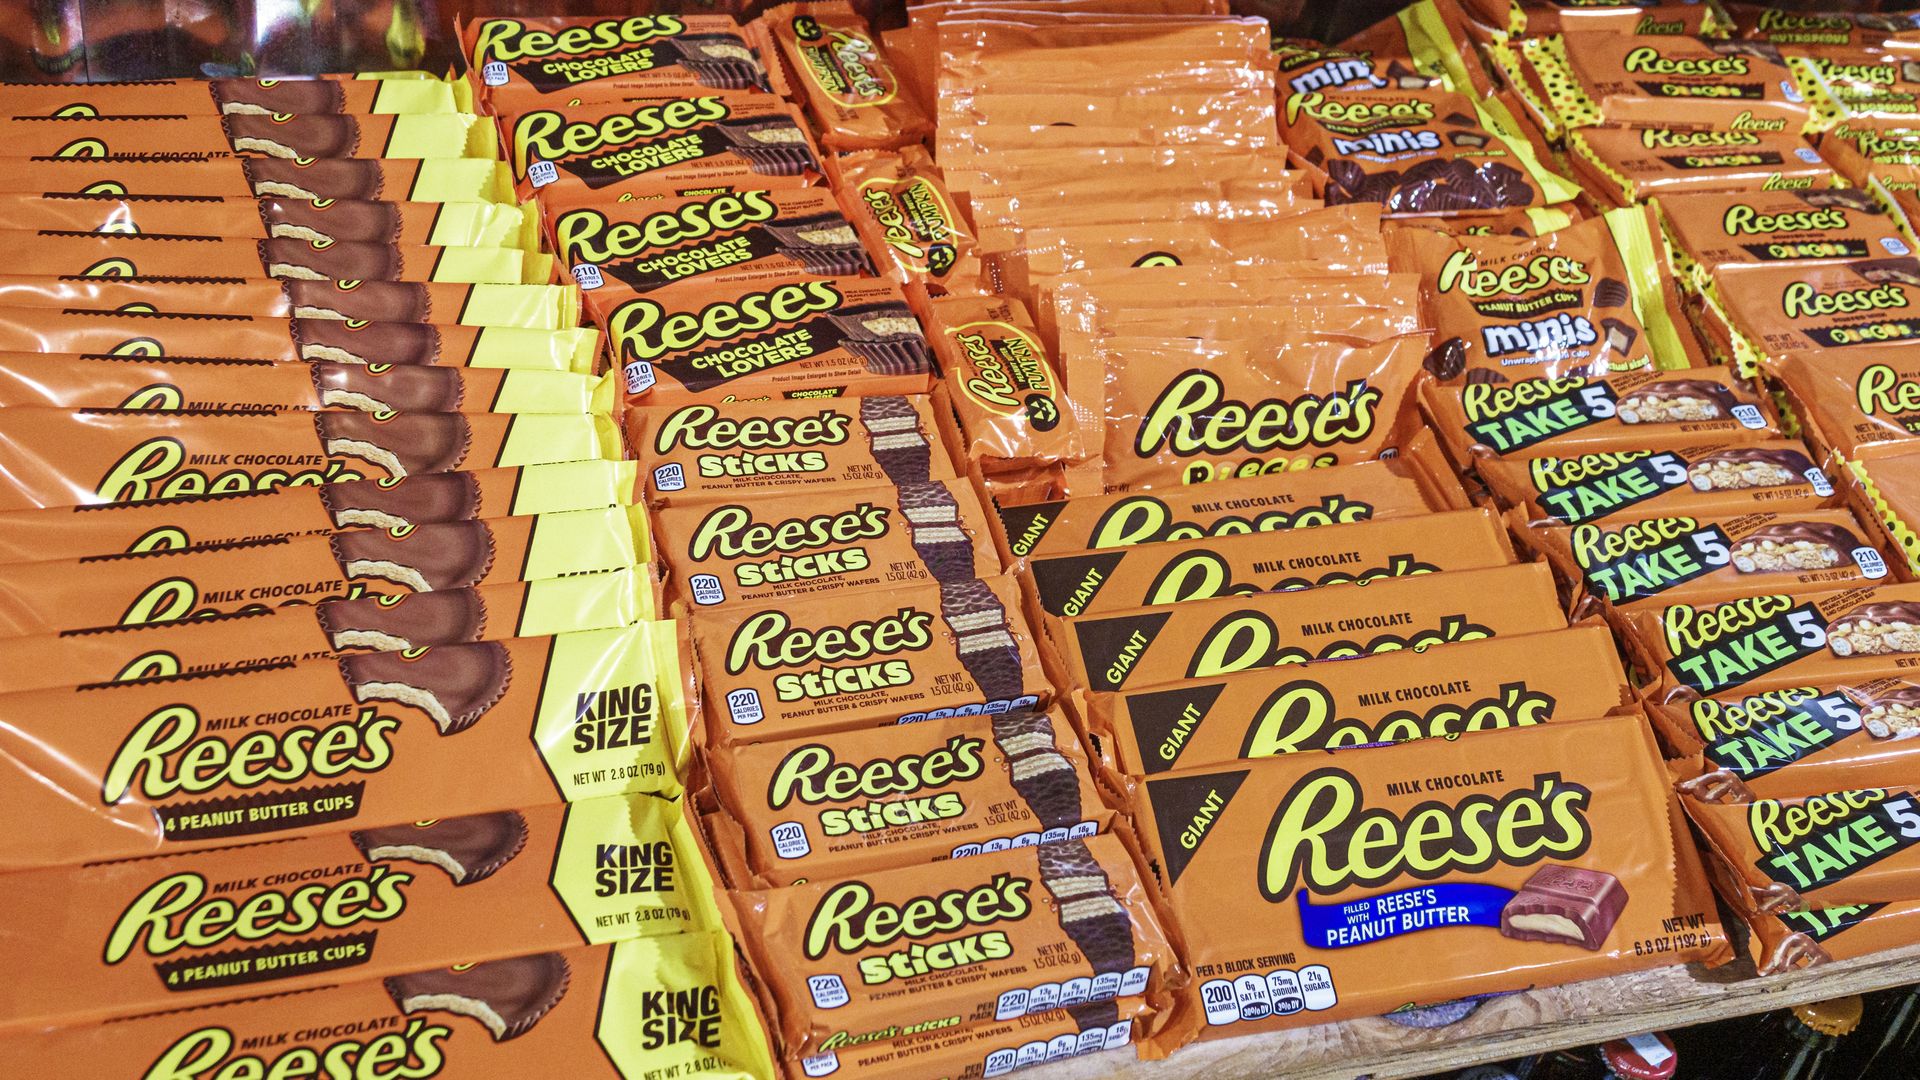 A display shows rows and rows of Reese's peanut butter candy in orange packages.